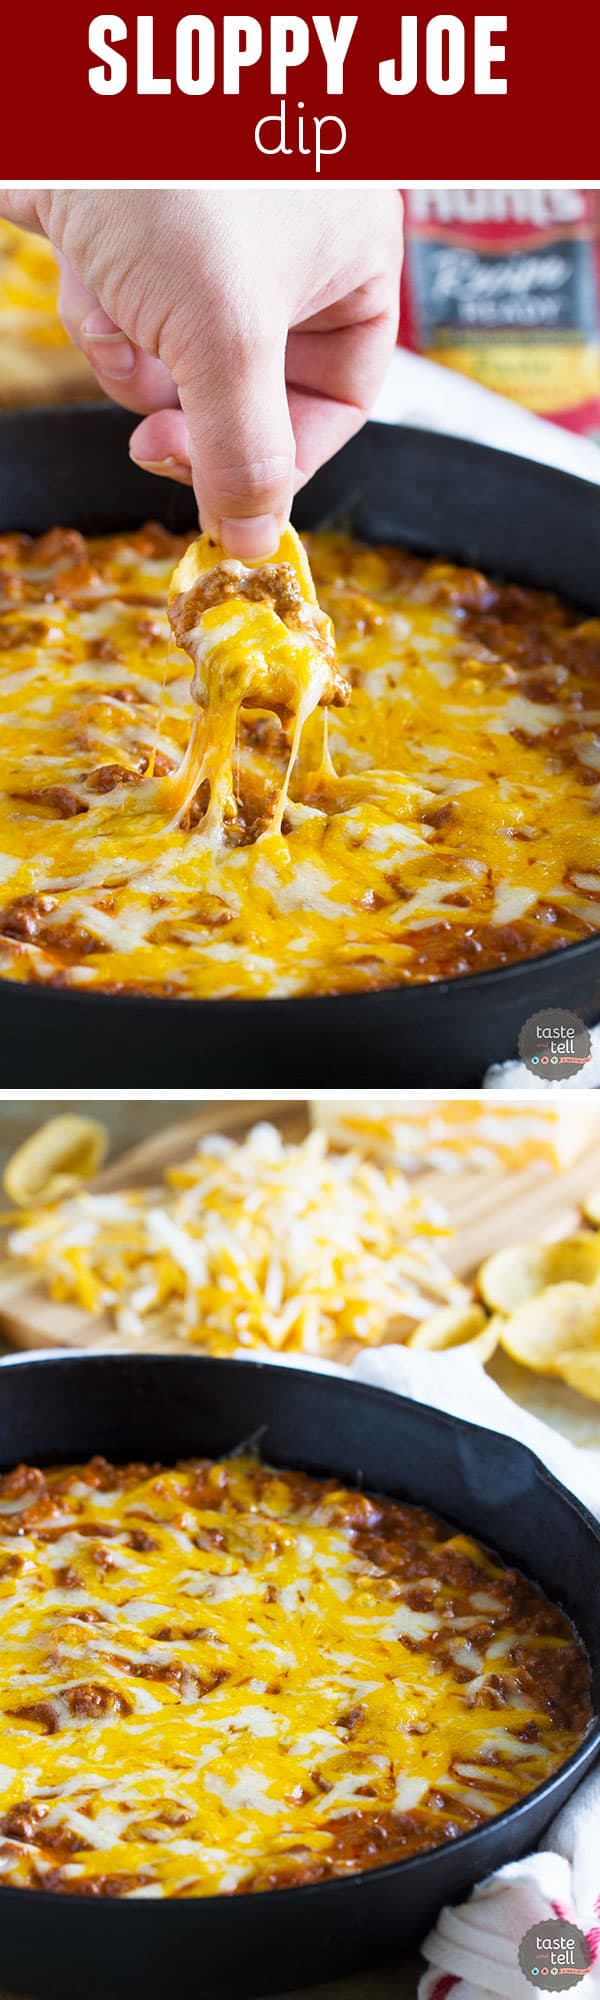 Turn a family friendly dinner idea into an appetizer that your friends won’t be able to get enough of! This Sloppy Joe Dip is cheesy and beefy and definitely crowd pleasing.